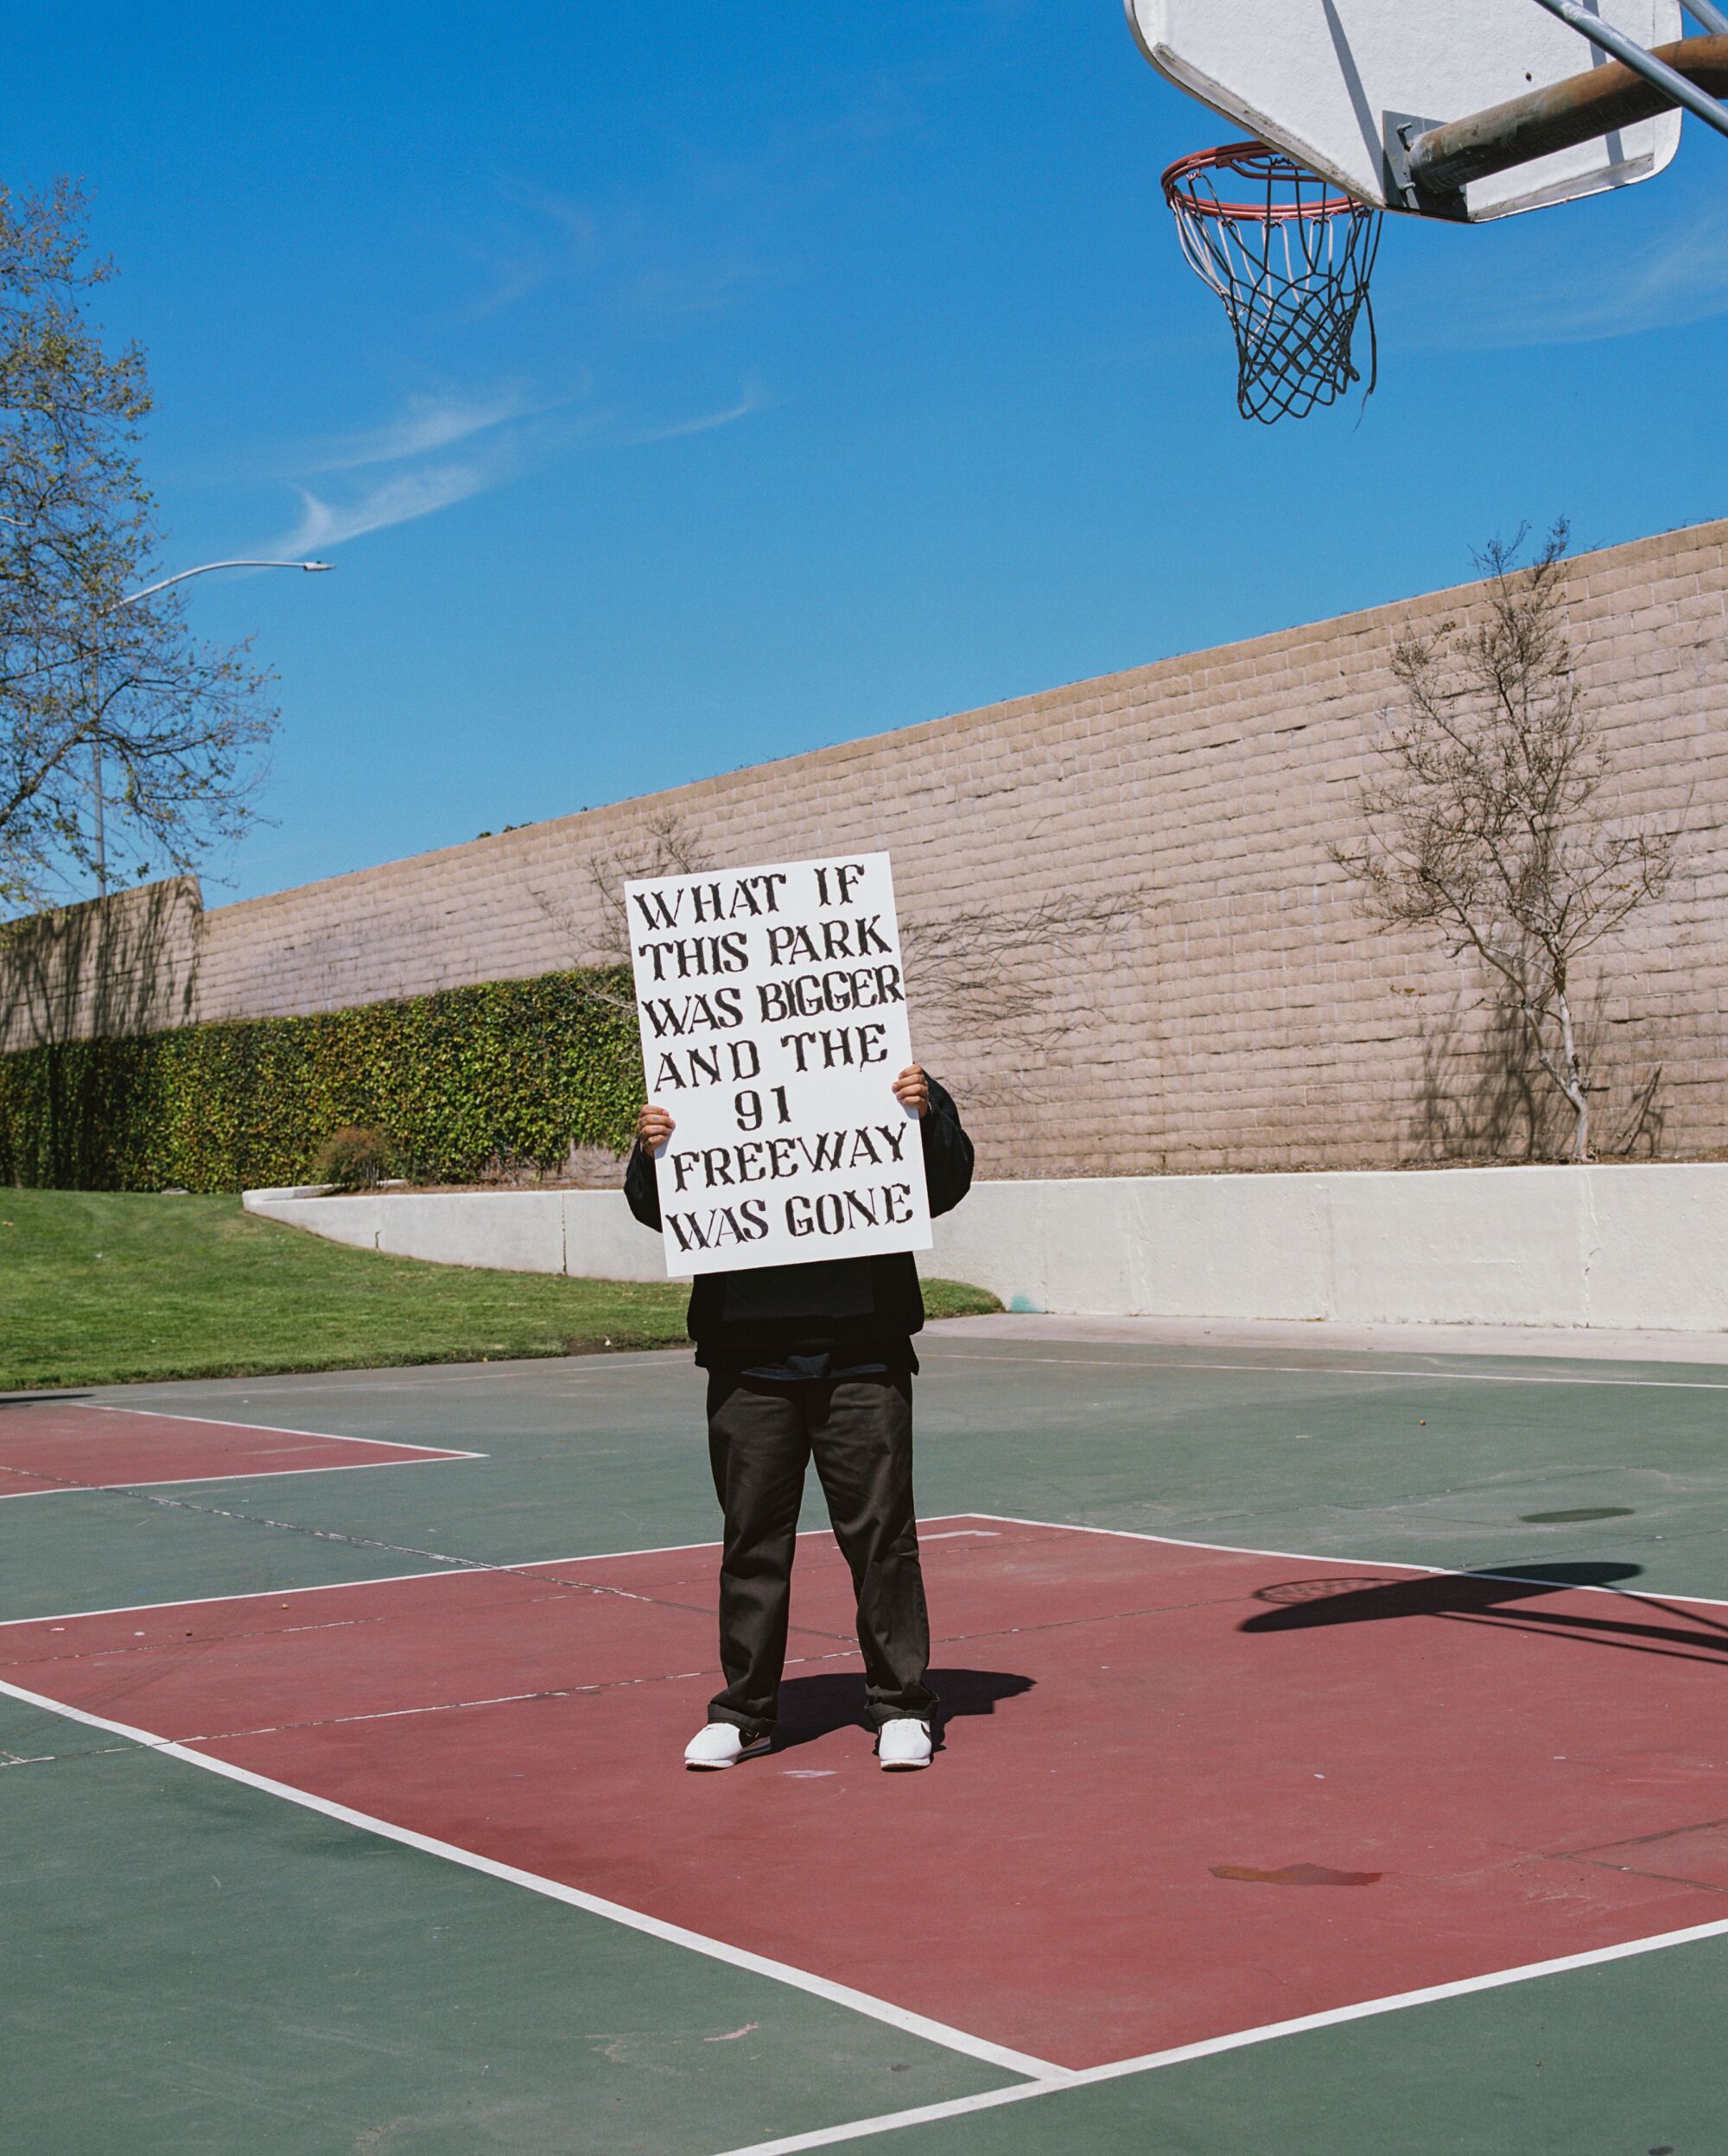 A man stands on a basketball court with the sign: "What If This Park Was Bigger and the 91 freeway as gone?"